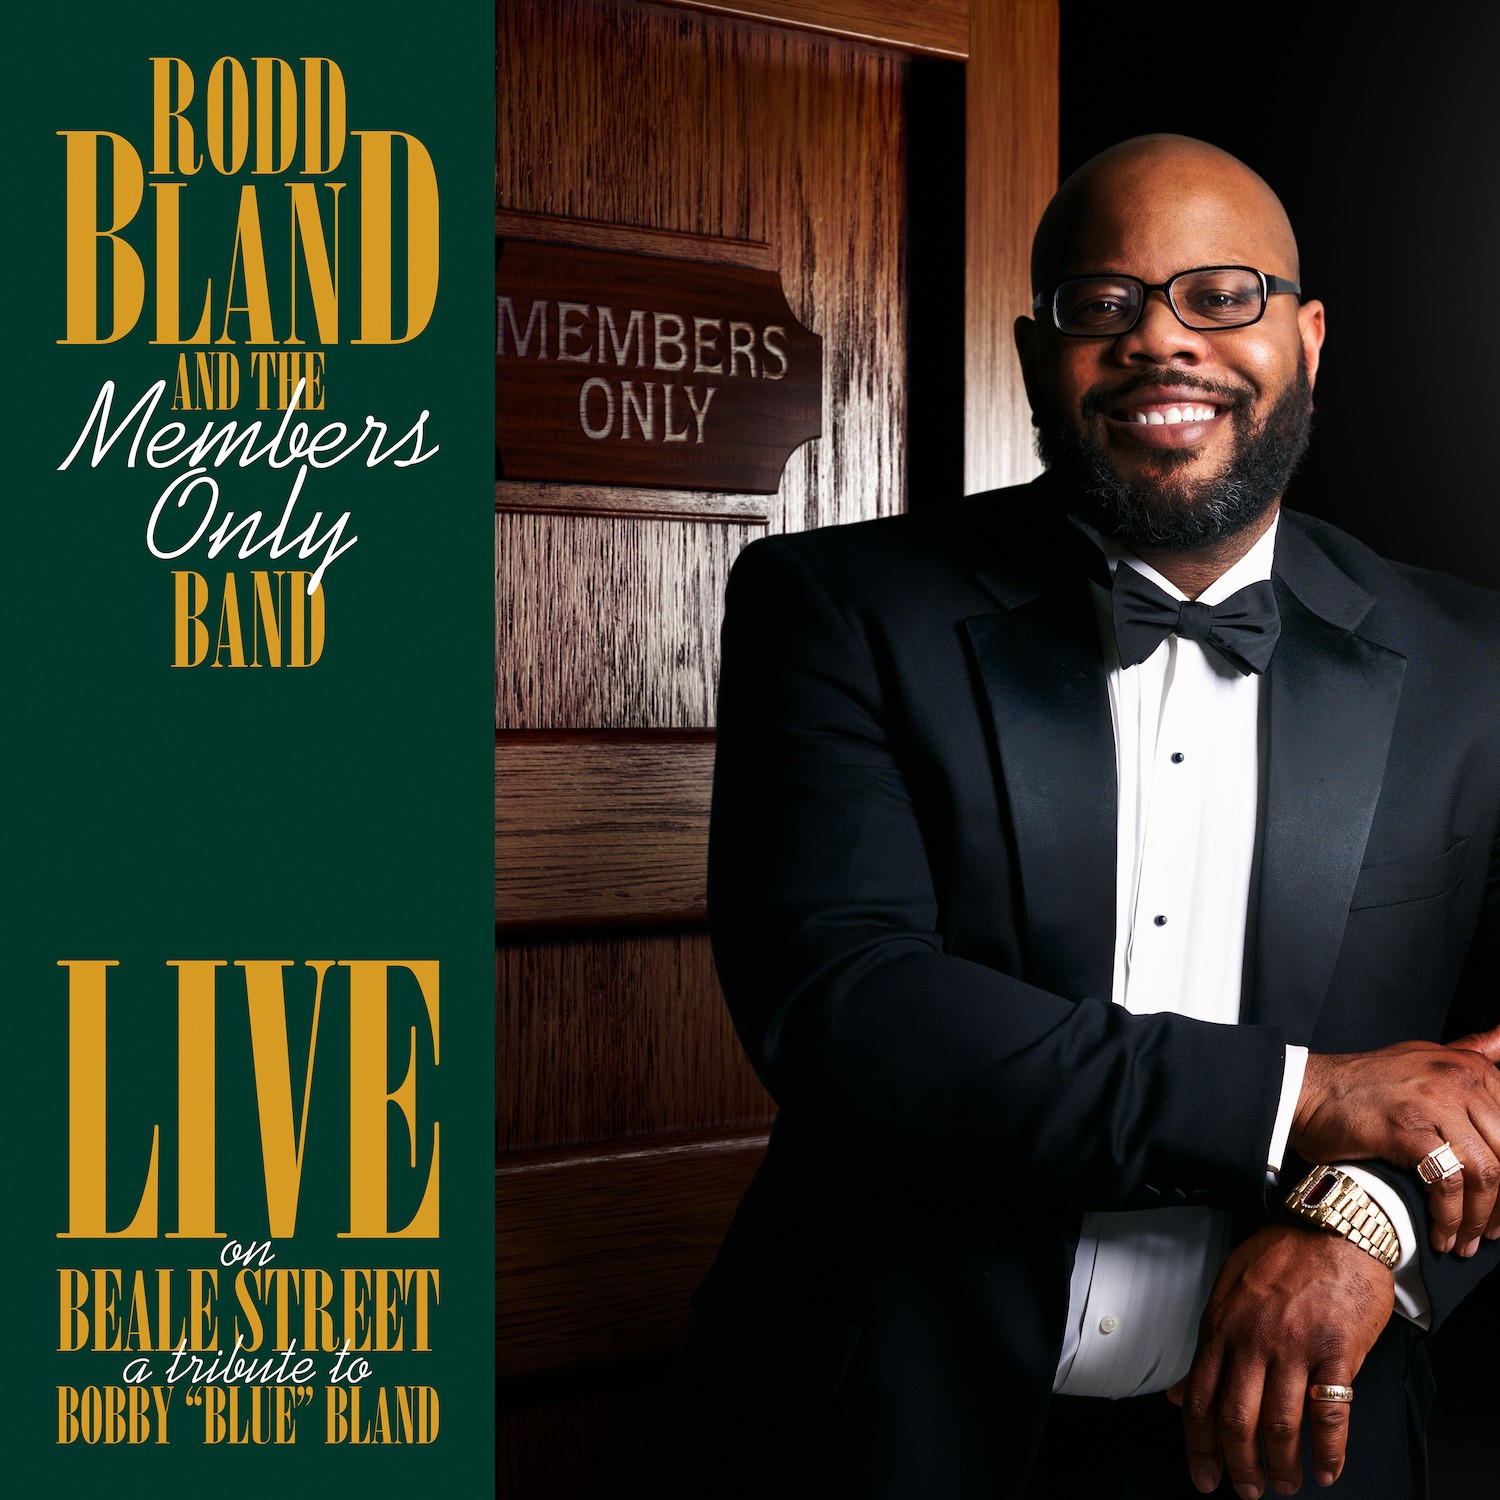 Rodd Bland & The Members Only Band - Live On Beale Street – A Tribute To Bobby Blue Bland